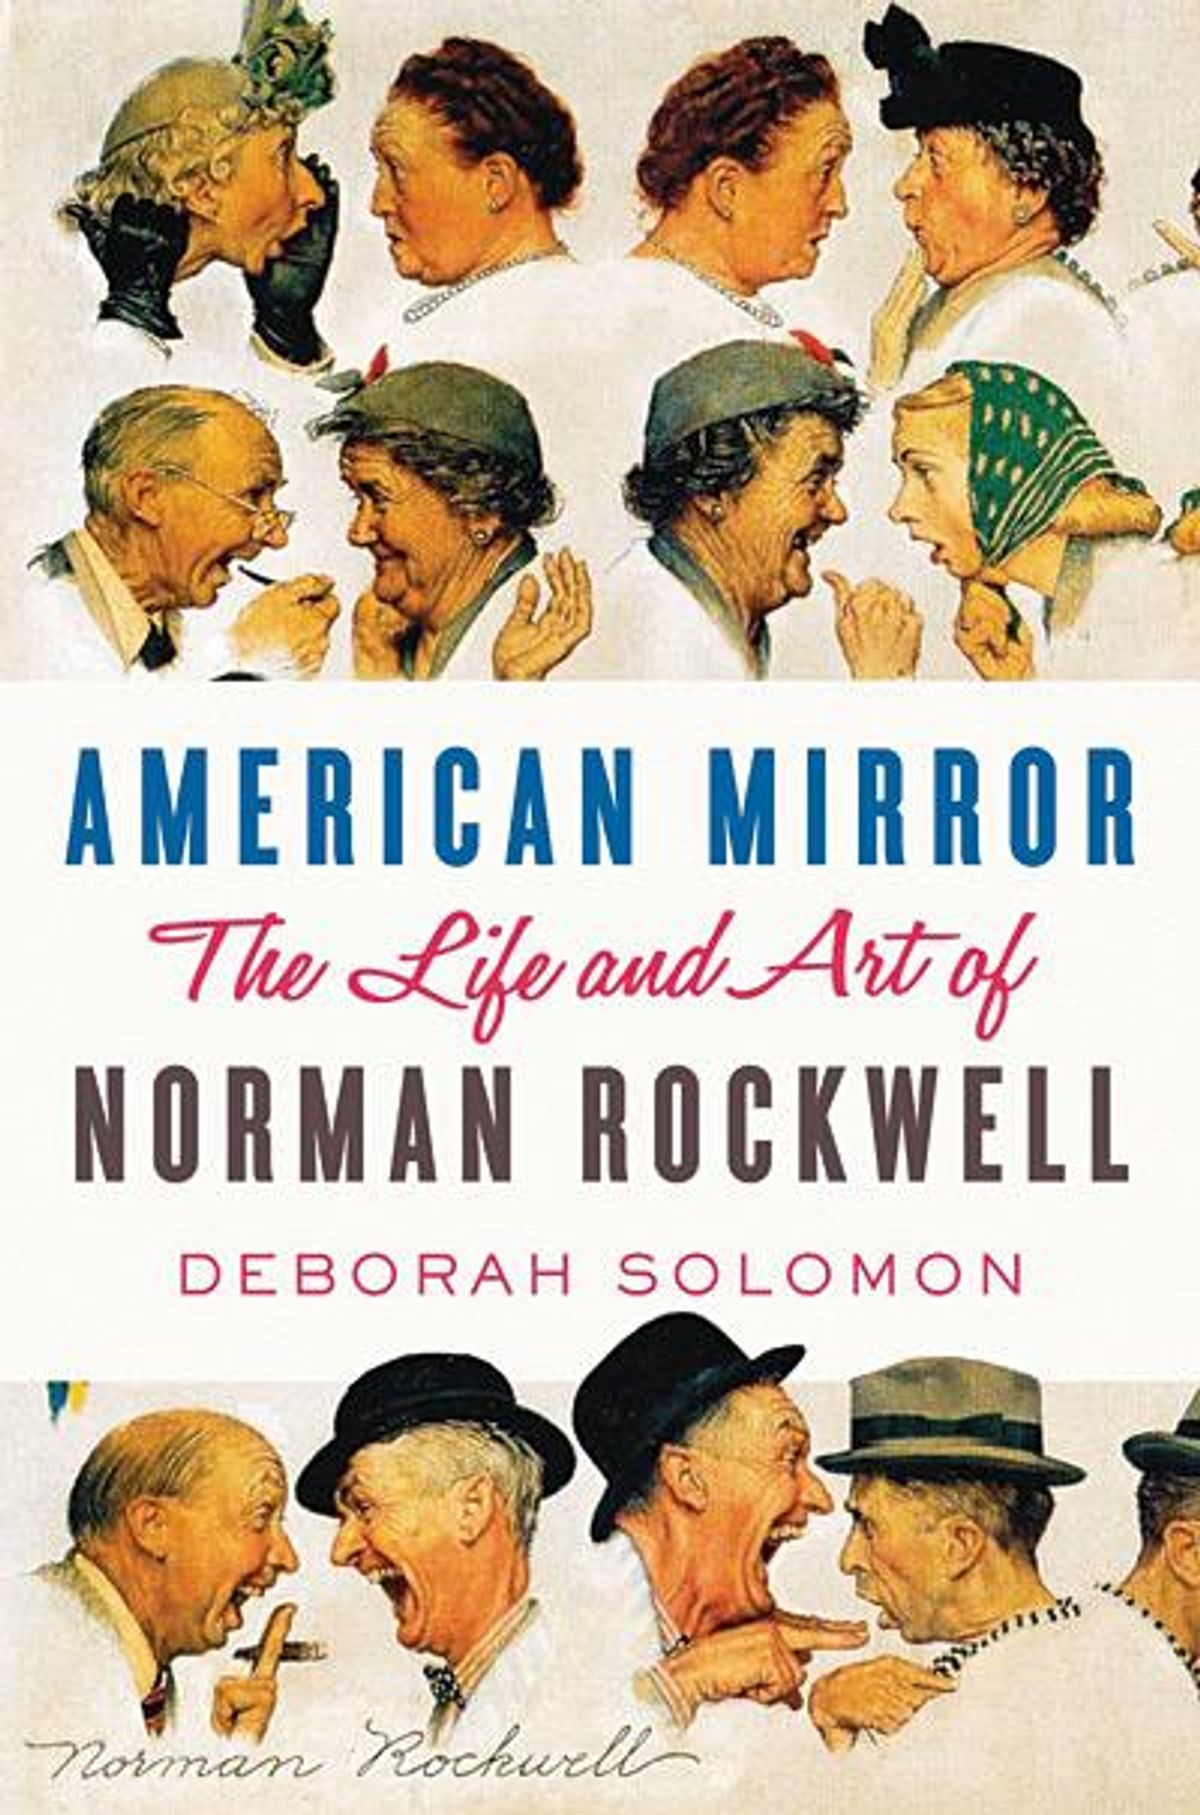 American-mirror-the-life-and-art-of-norman-rockwellx400deep